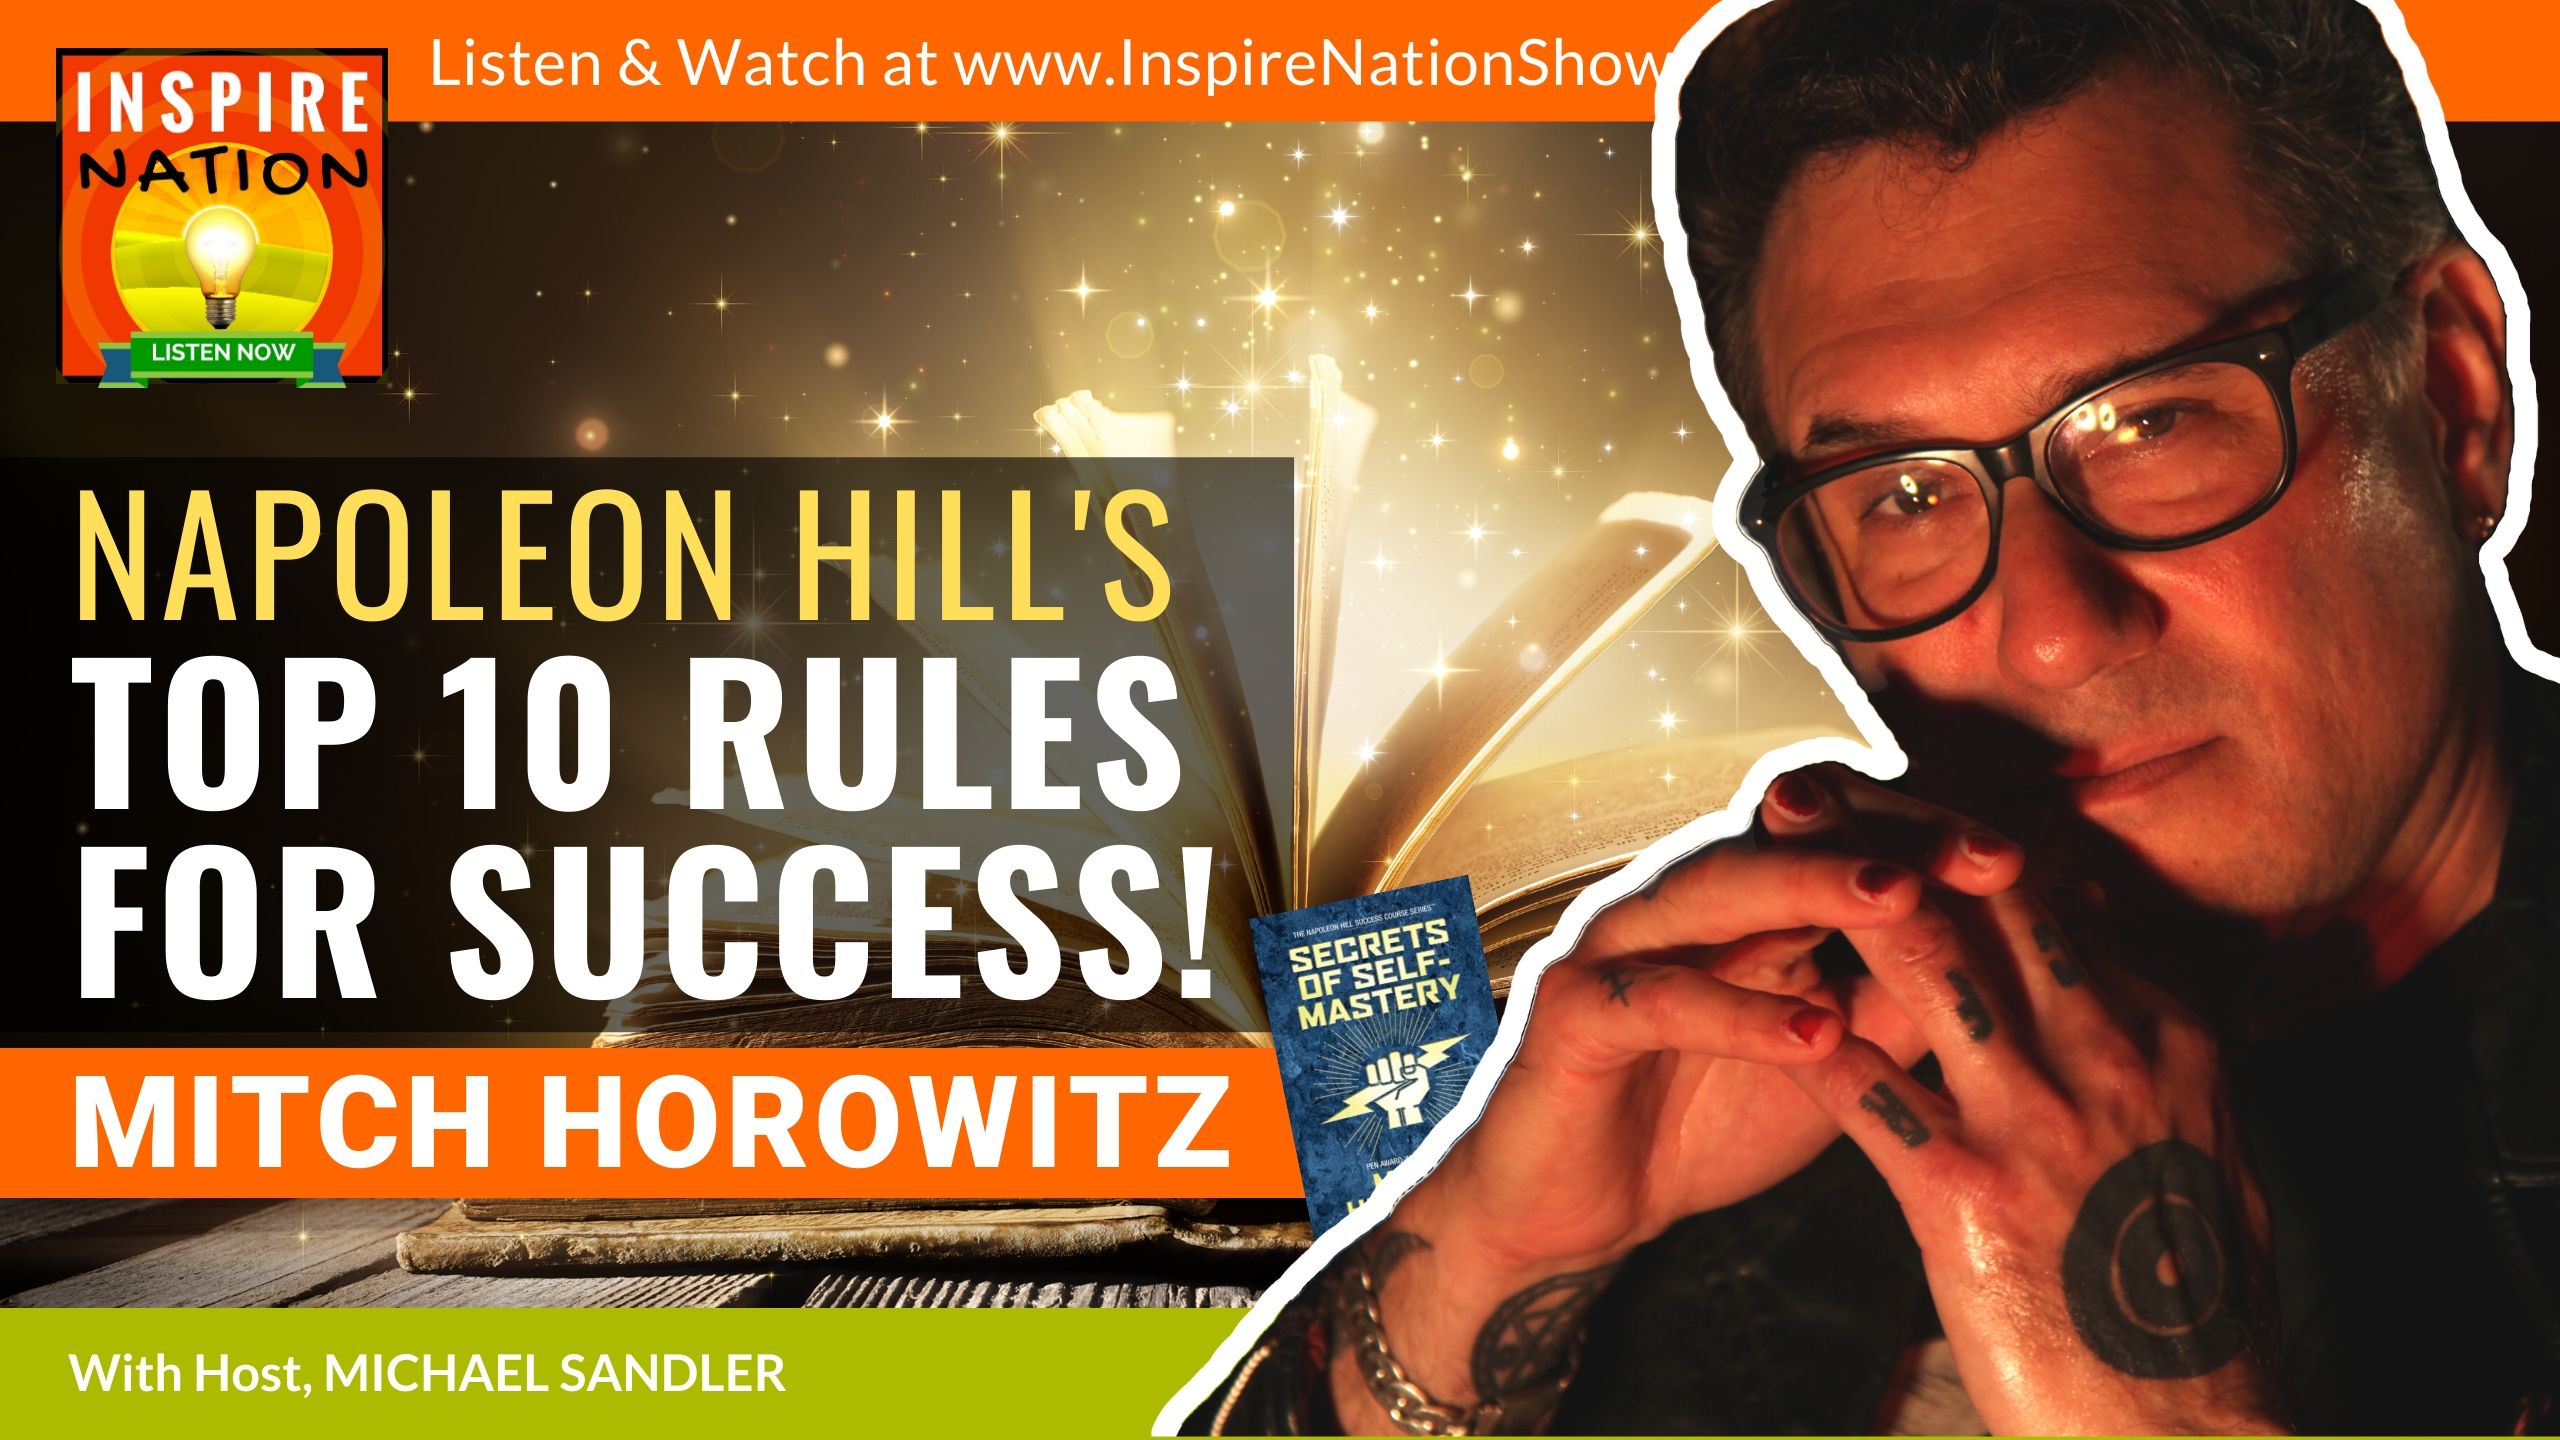 Michael Sandler interviews Mitch Horowitz on Napoleon Hill's Top 10 Rules for Success!